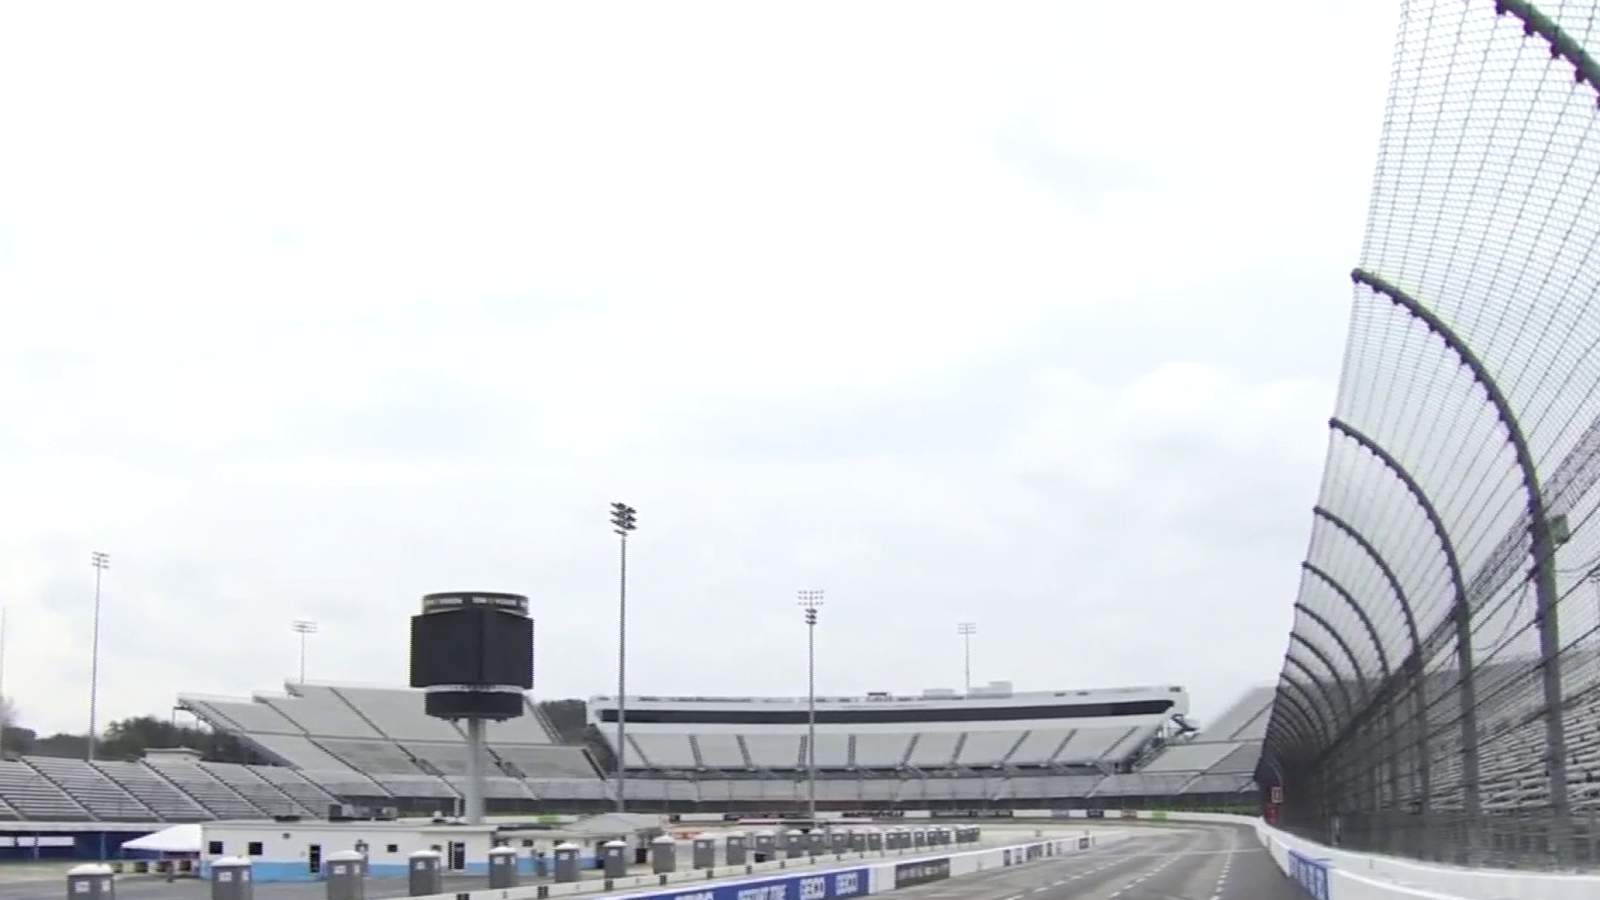 Final preparations underway for Martinsville Speedway’s biggest race weekend in over a year